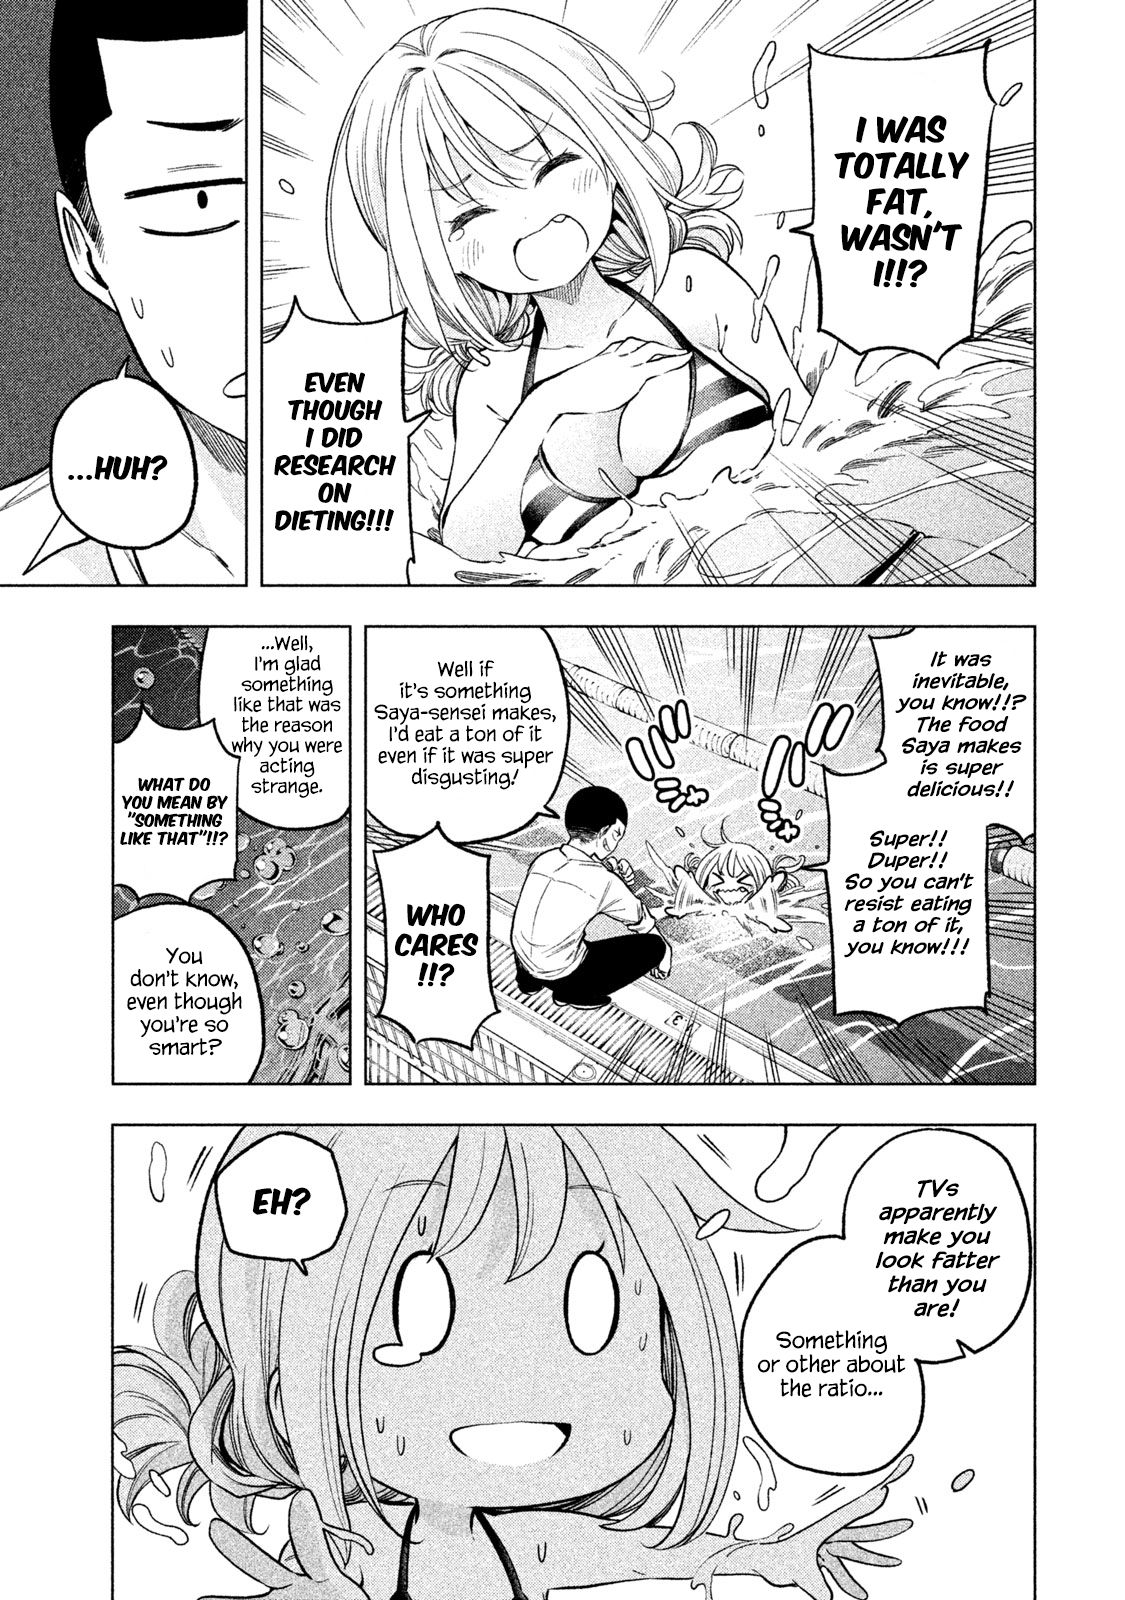 Why are you here Sensei!? Vol.5 Chapter 48: Hide & Shaft